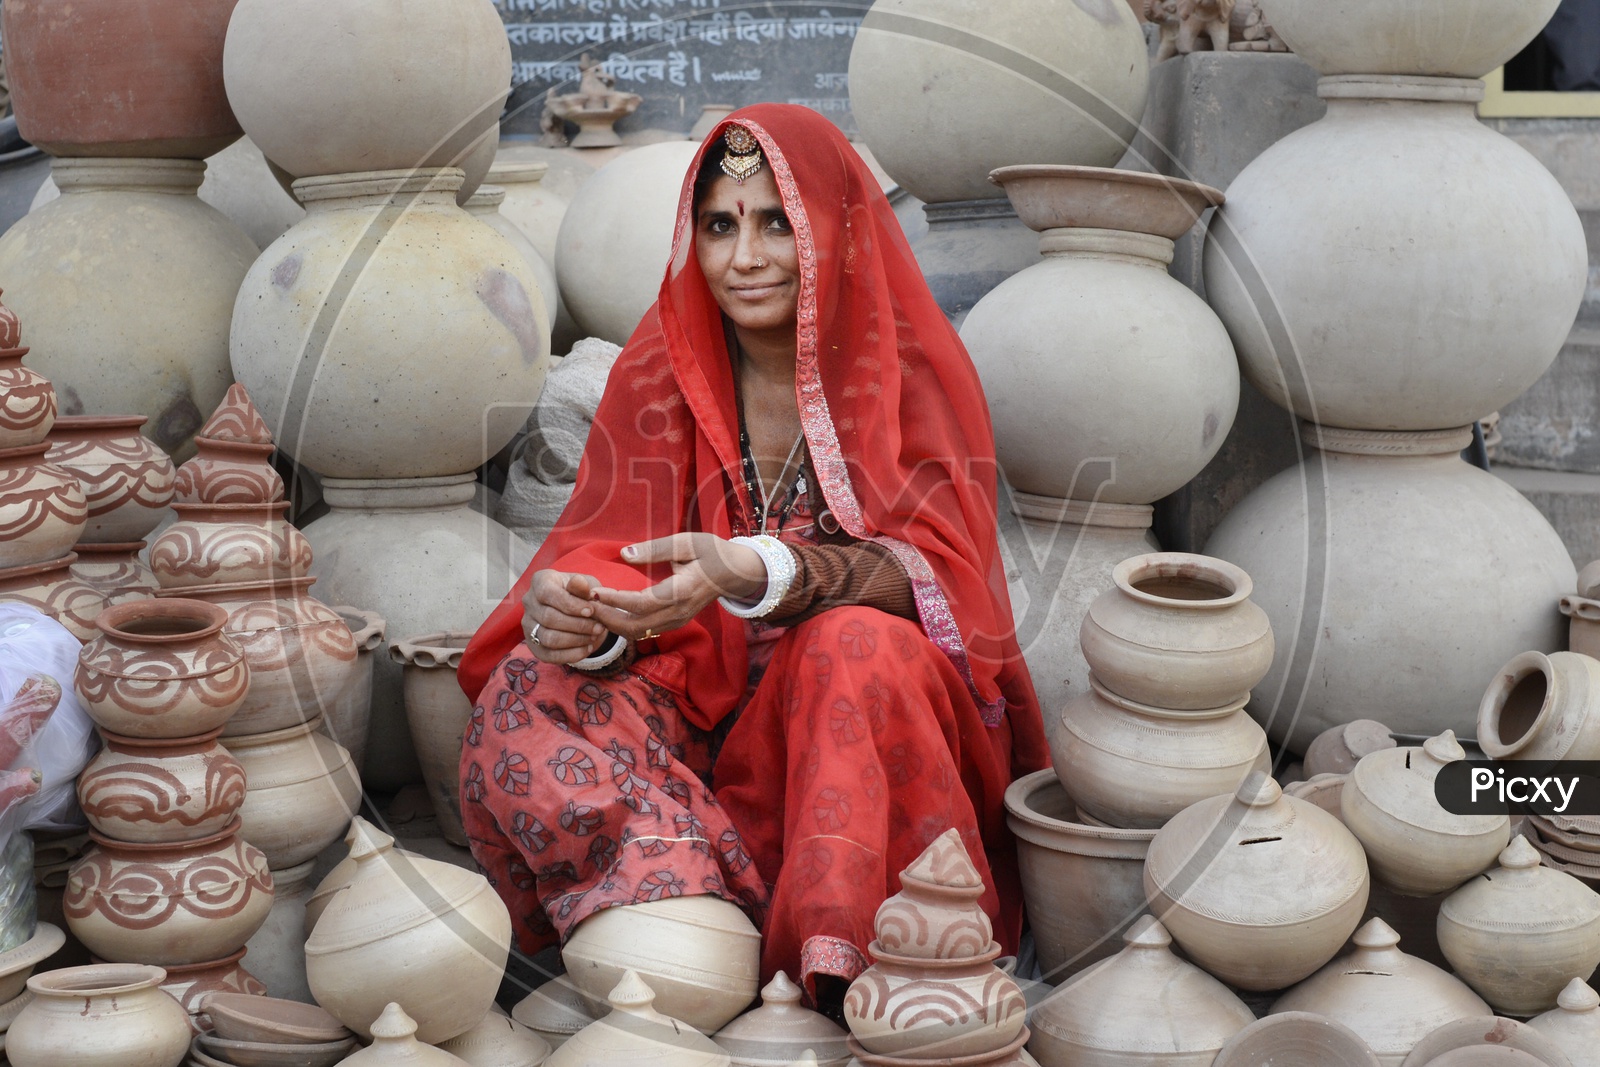 Rajasthani Woman in Traditional Attire Selling Clay Pots